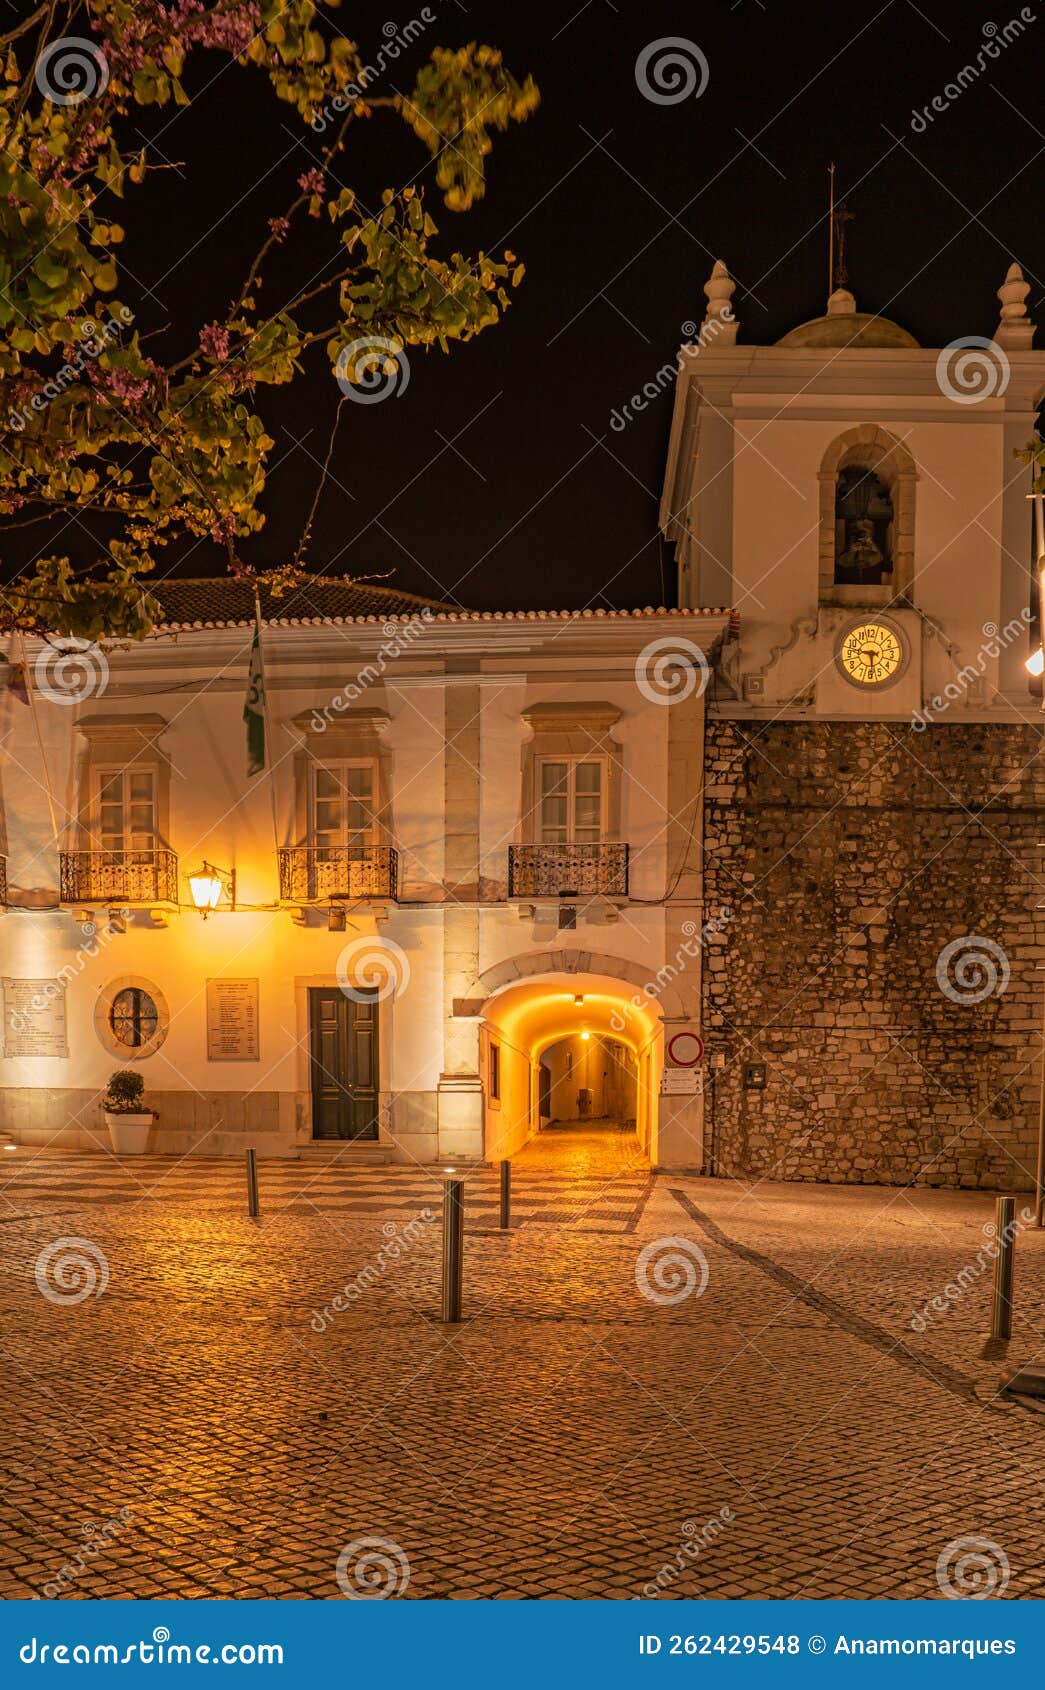 the city council in the old town of loule at the algarve, portugal. town hall illuminated at night